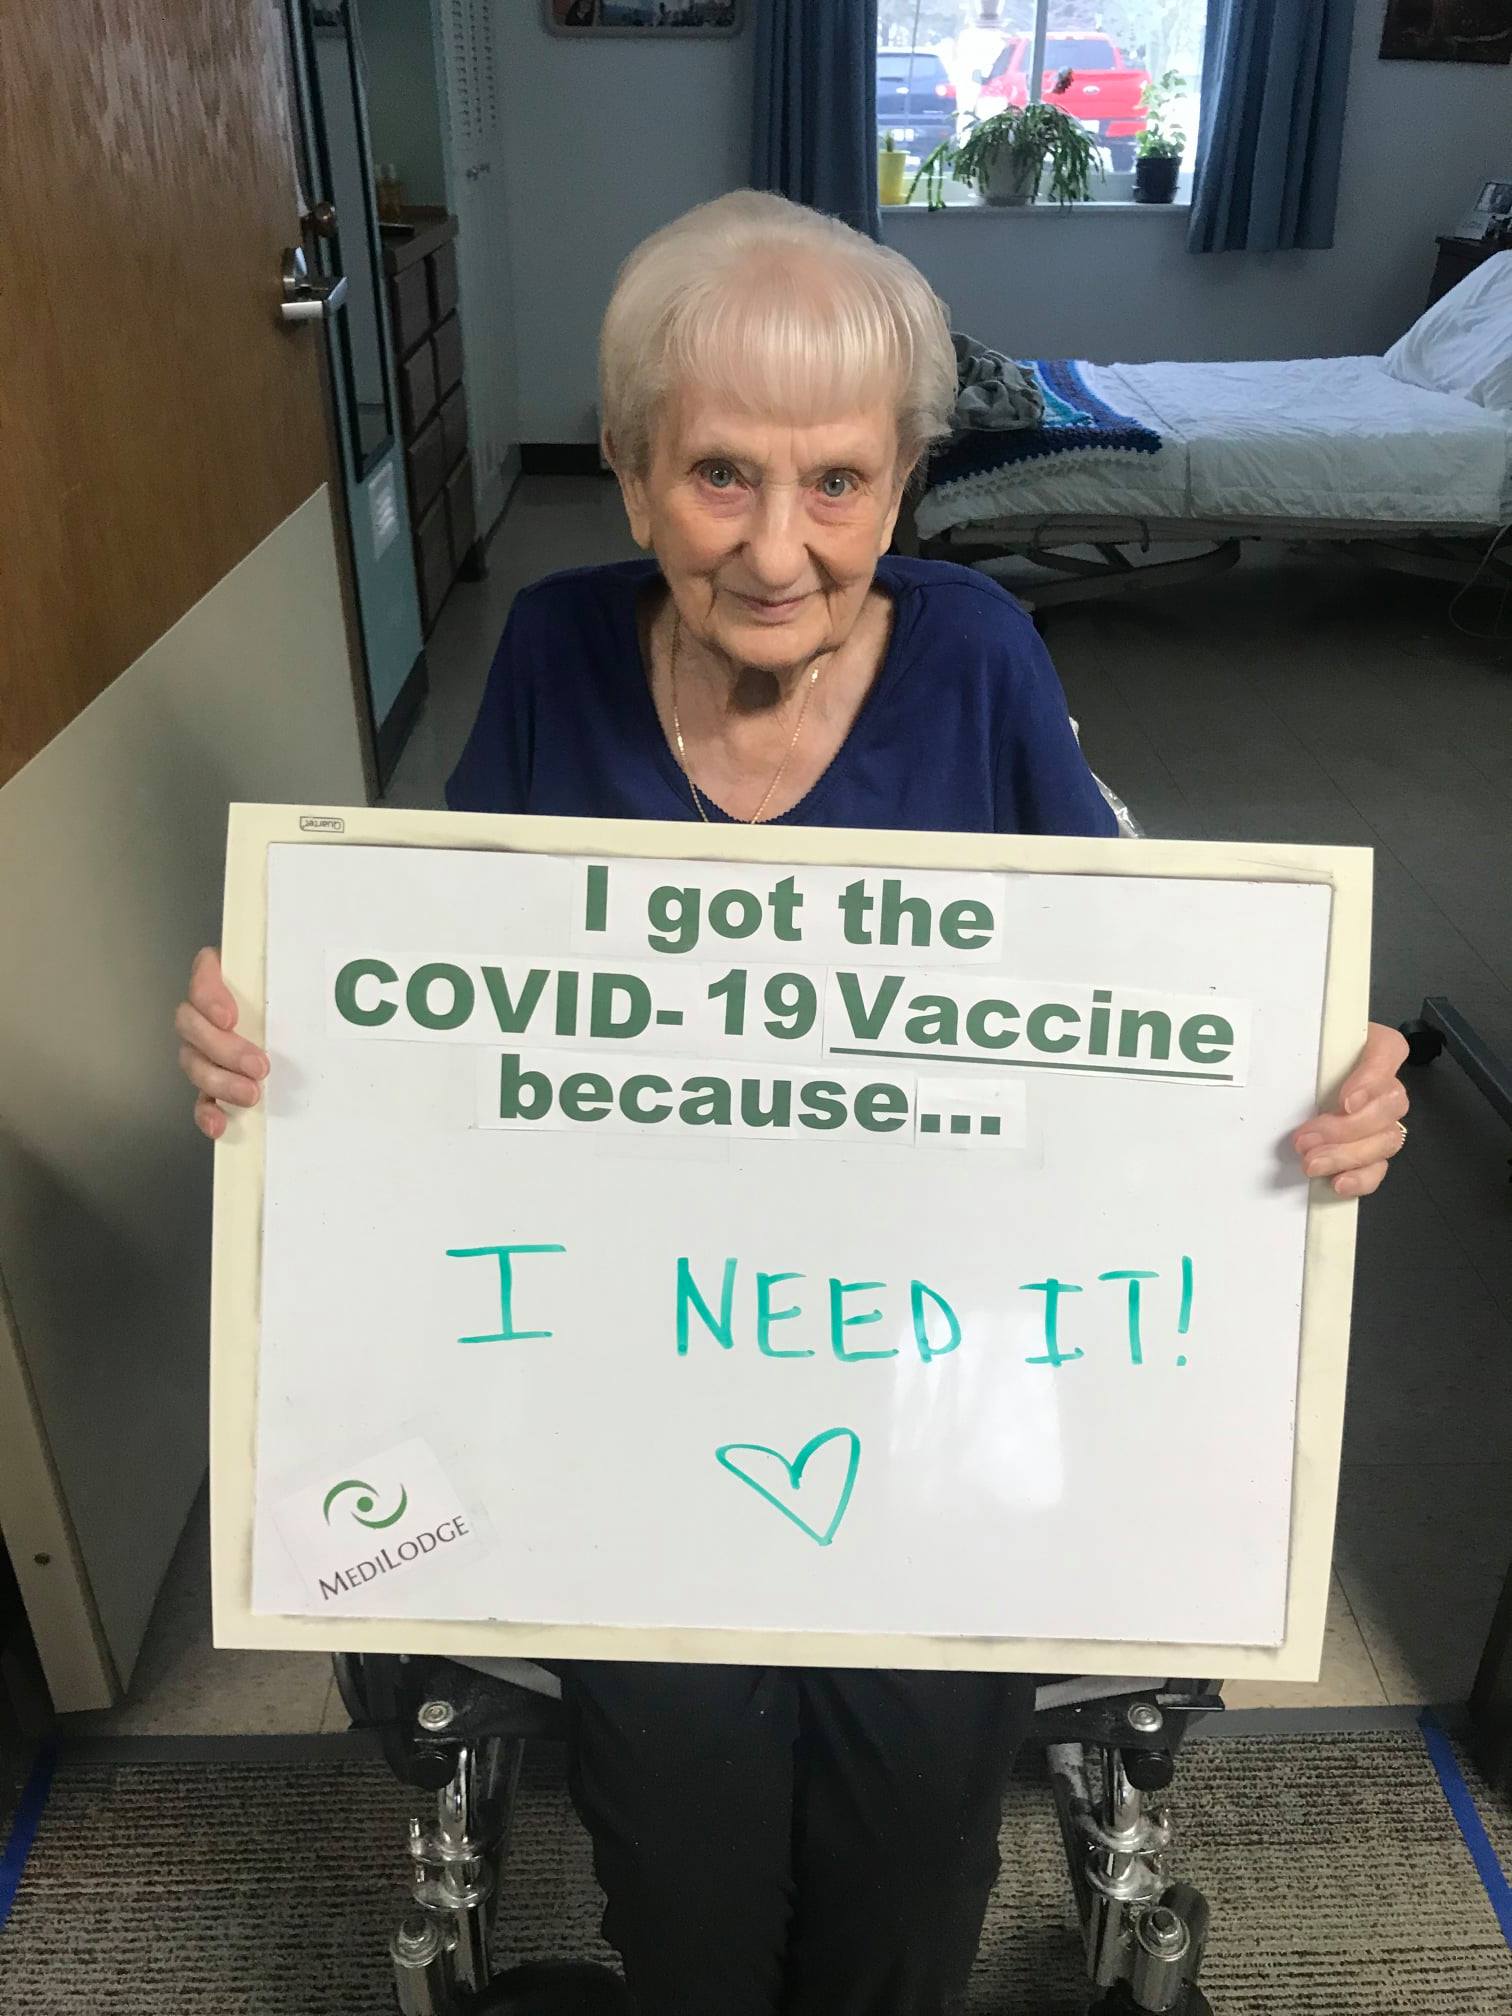 I got the COVID-19 vaccine because i need it